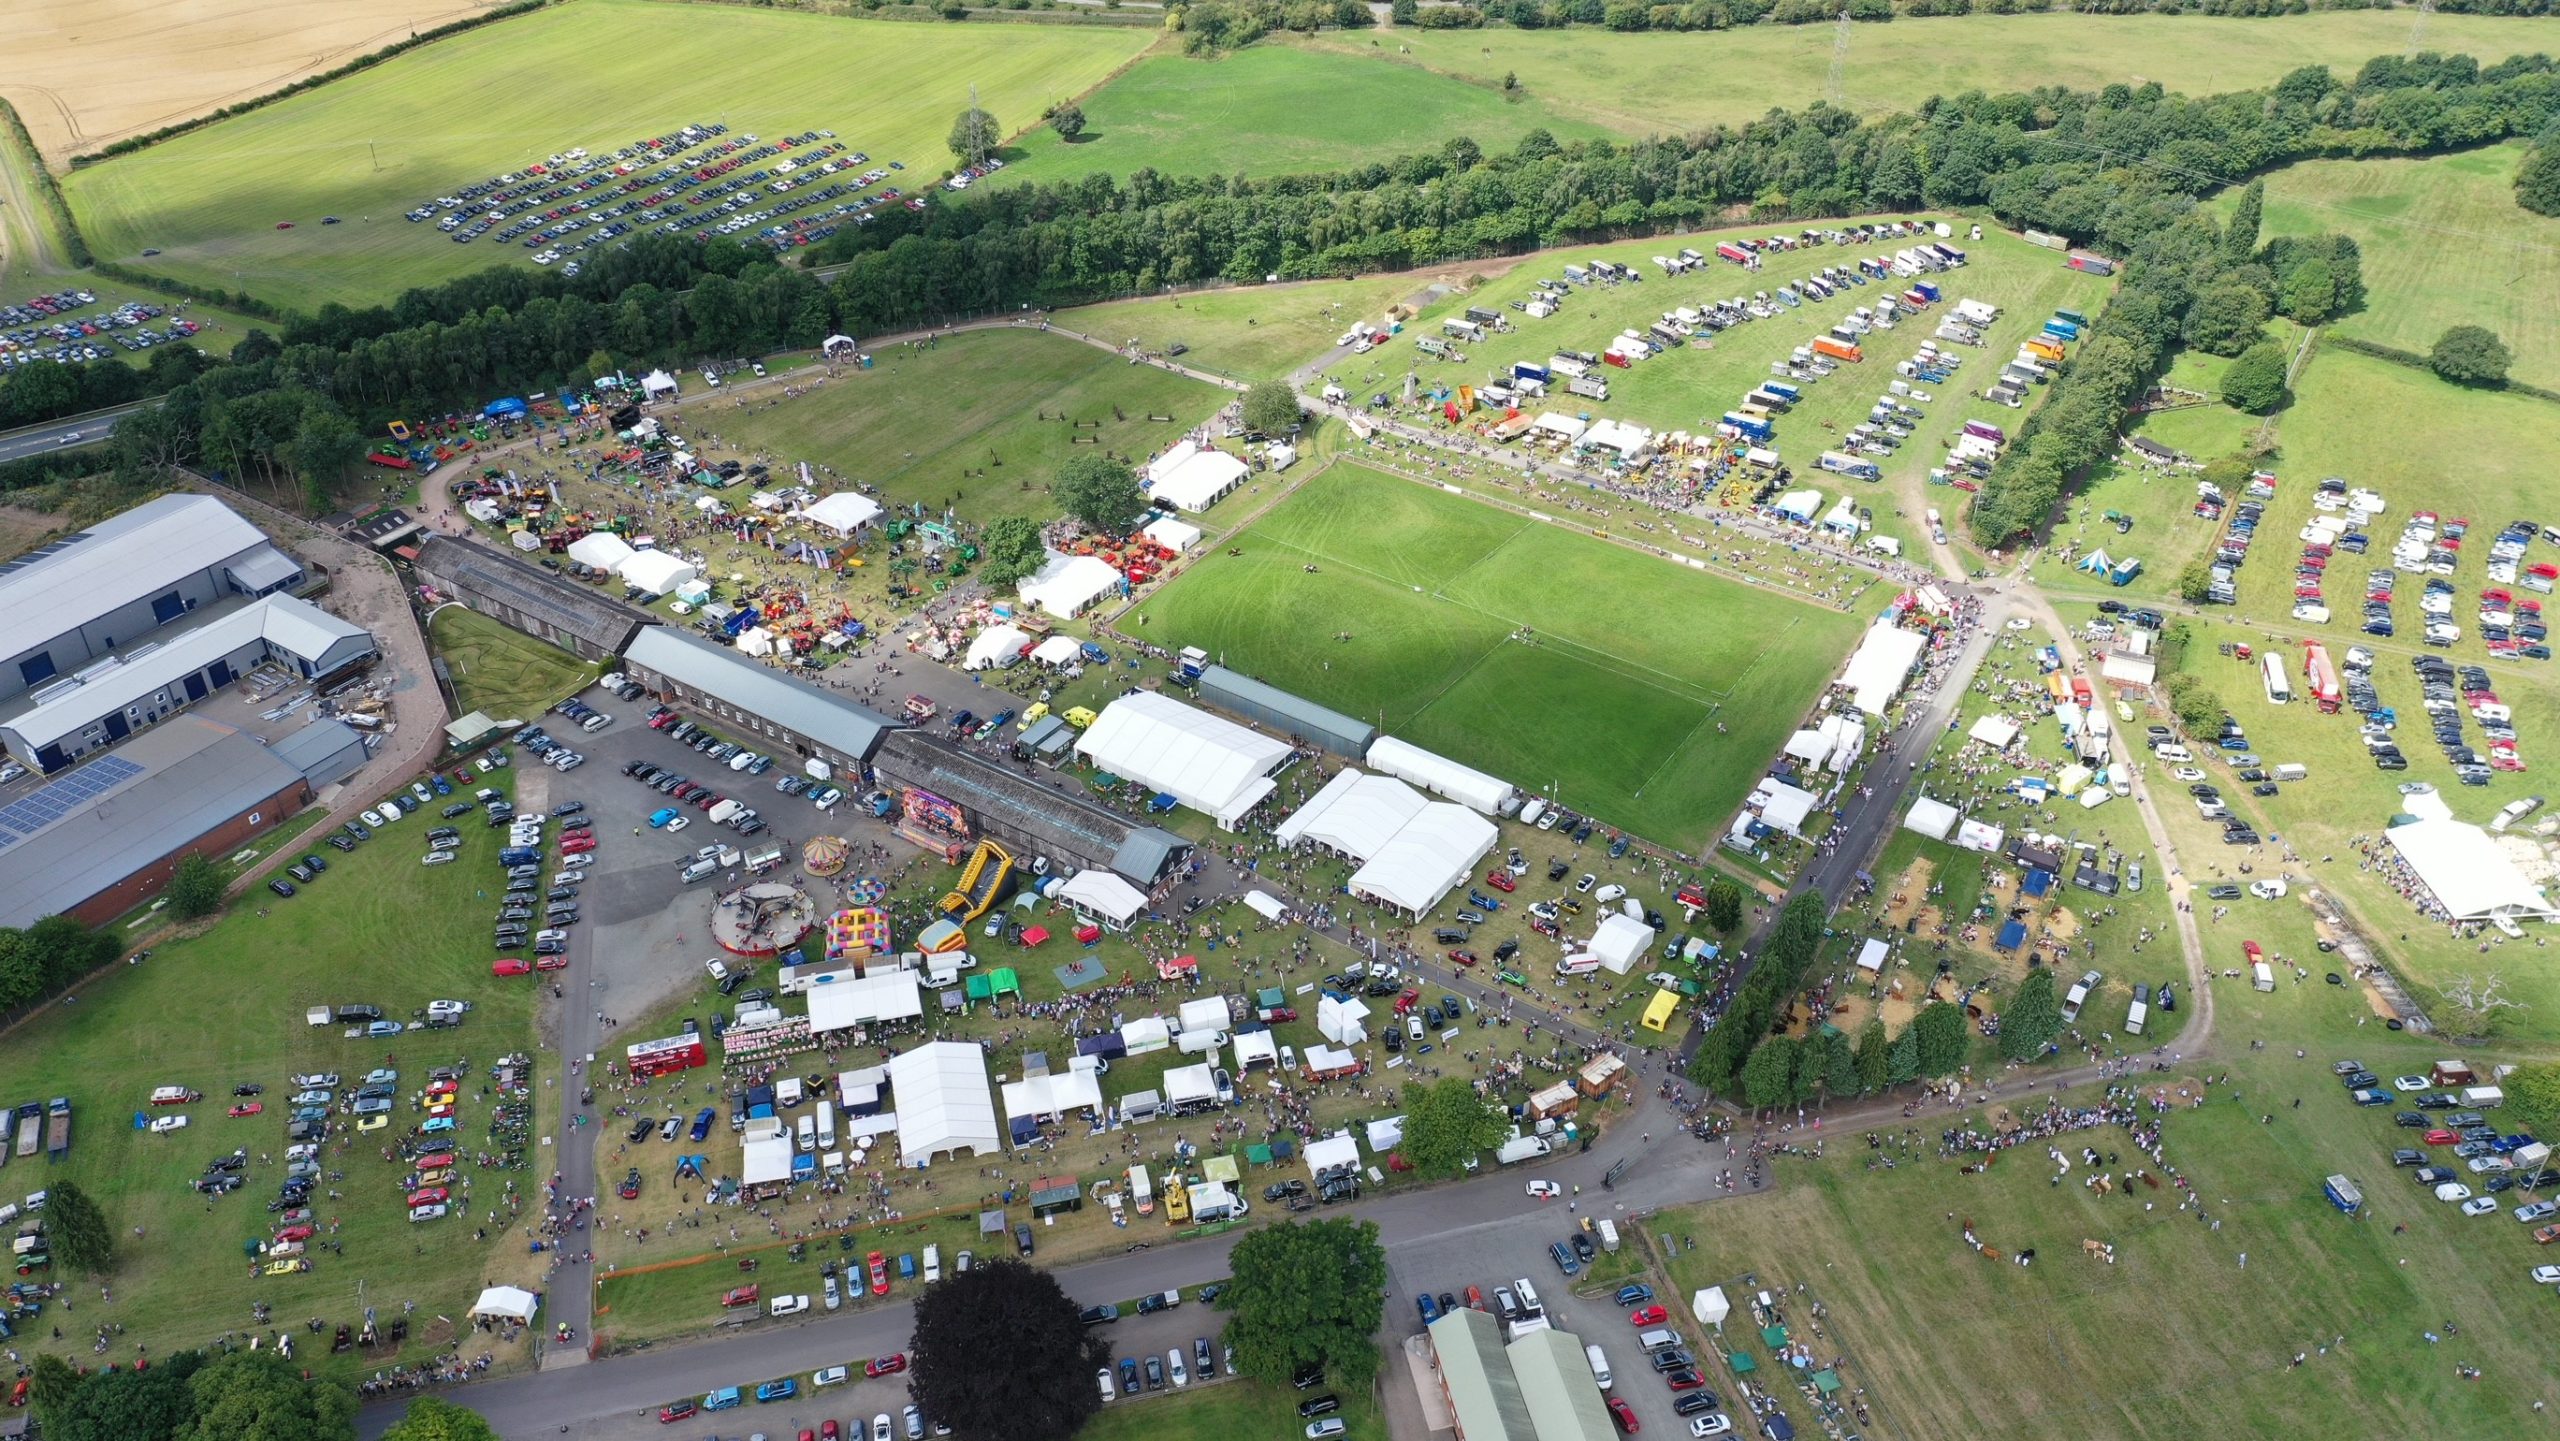 Aerial view of Oswestry show